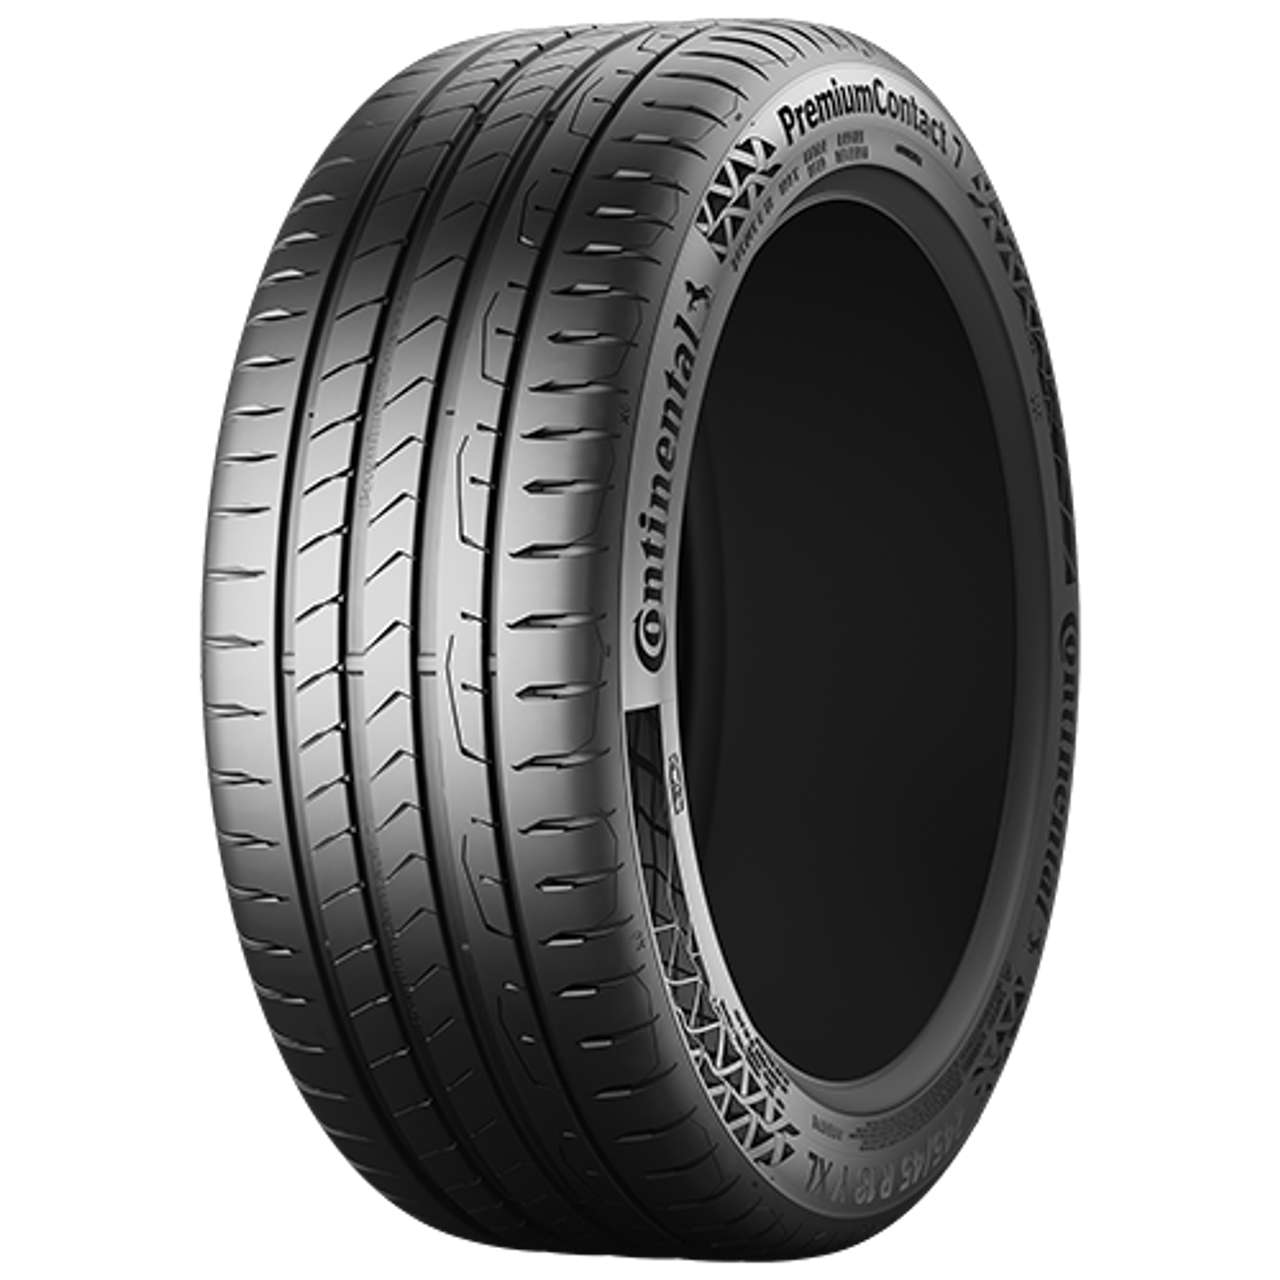 CONTINENTAL PREMIUMCONTACT 7 (EVc) 215/55R18 99V FR BSW